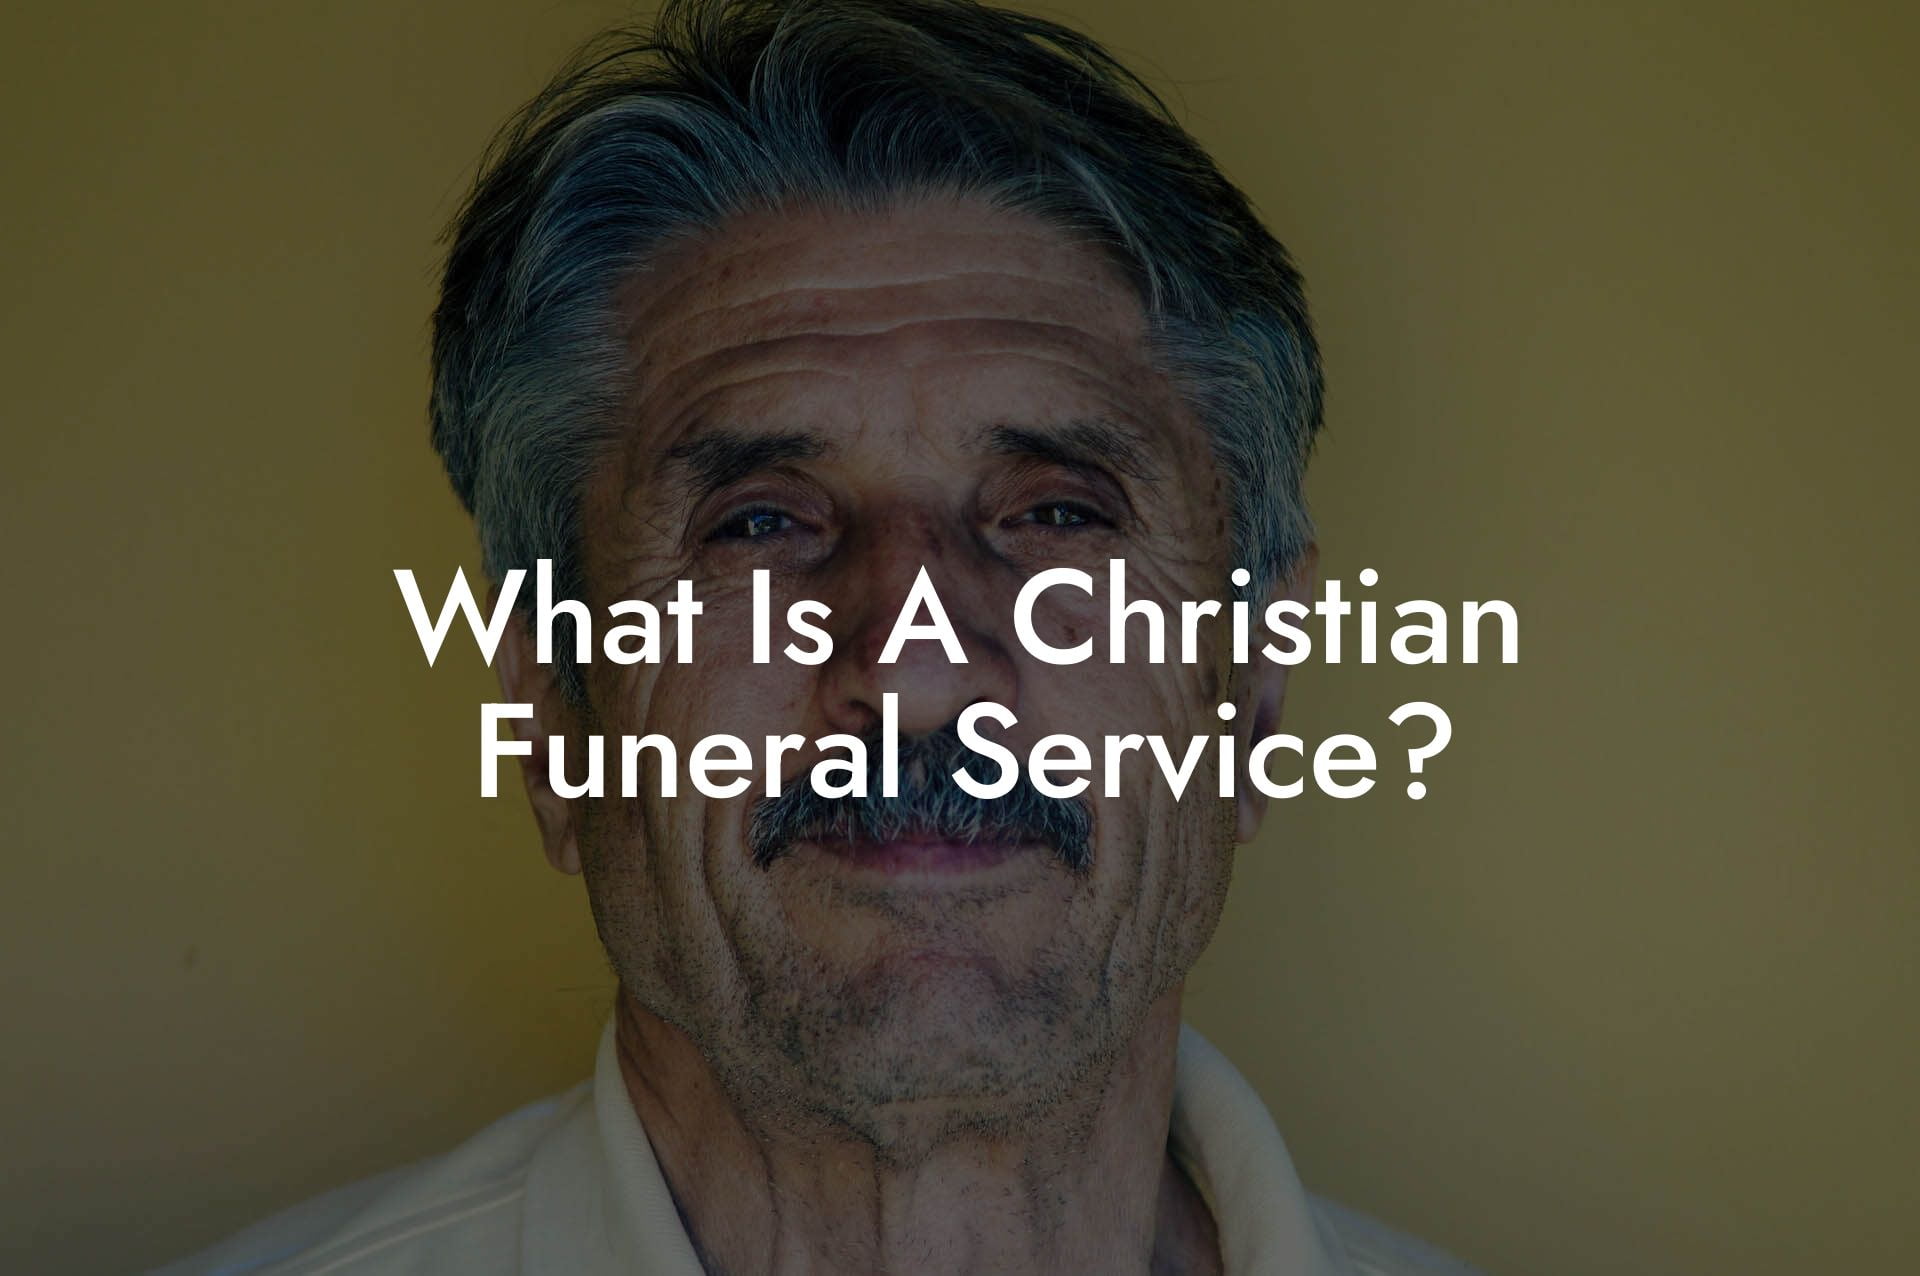 What Is A Christian Funeral Service?